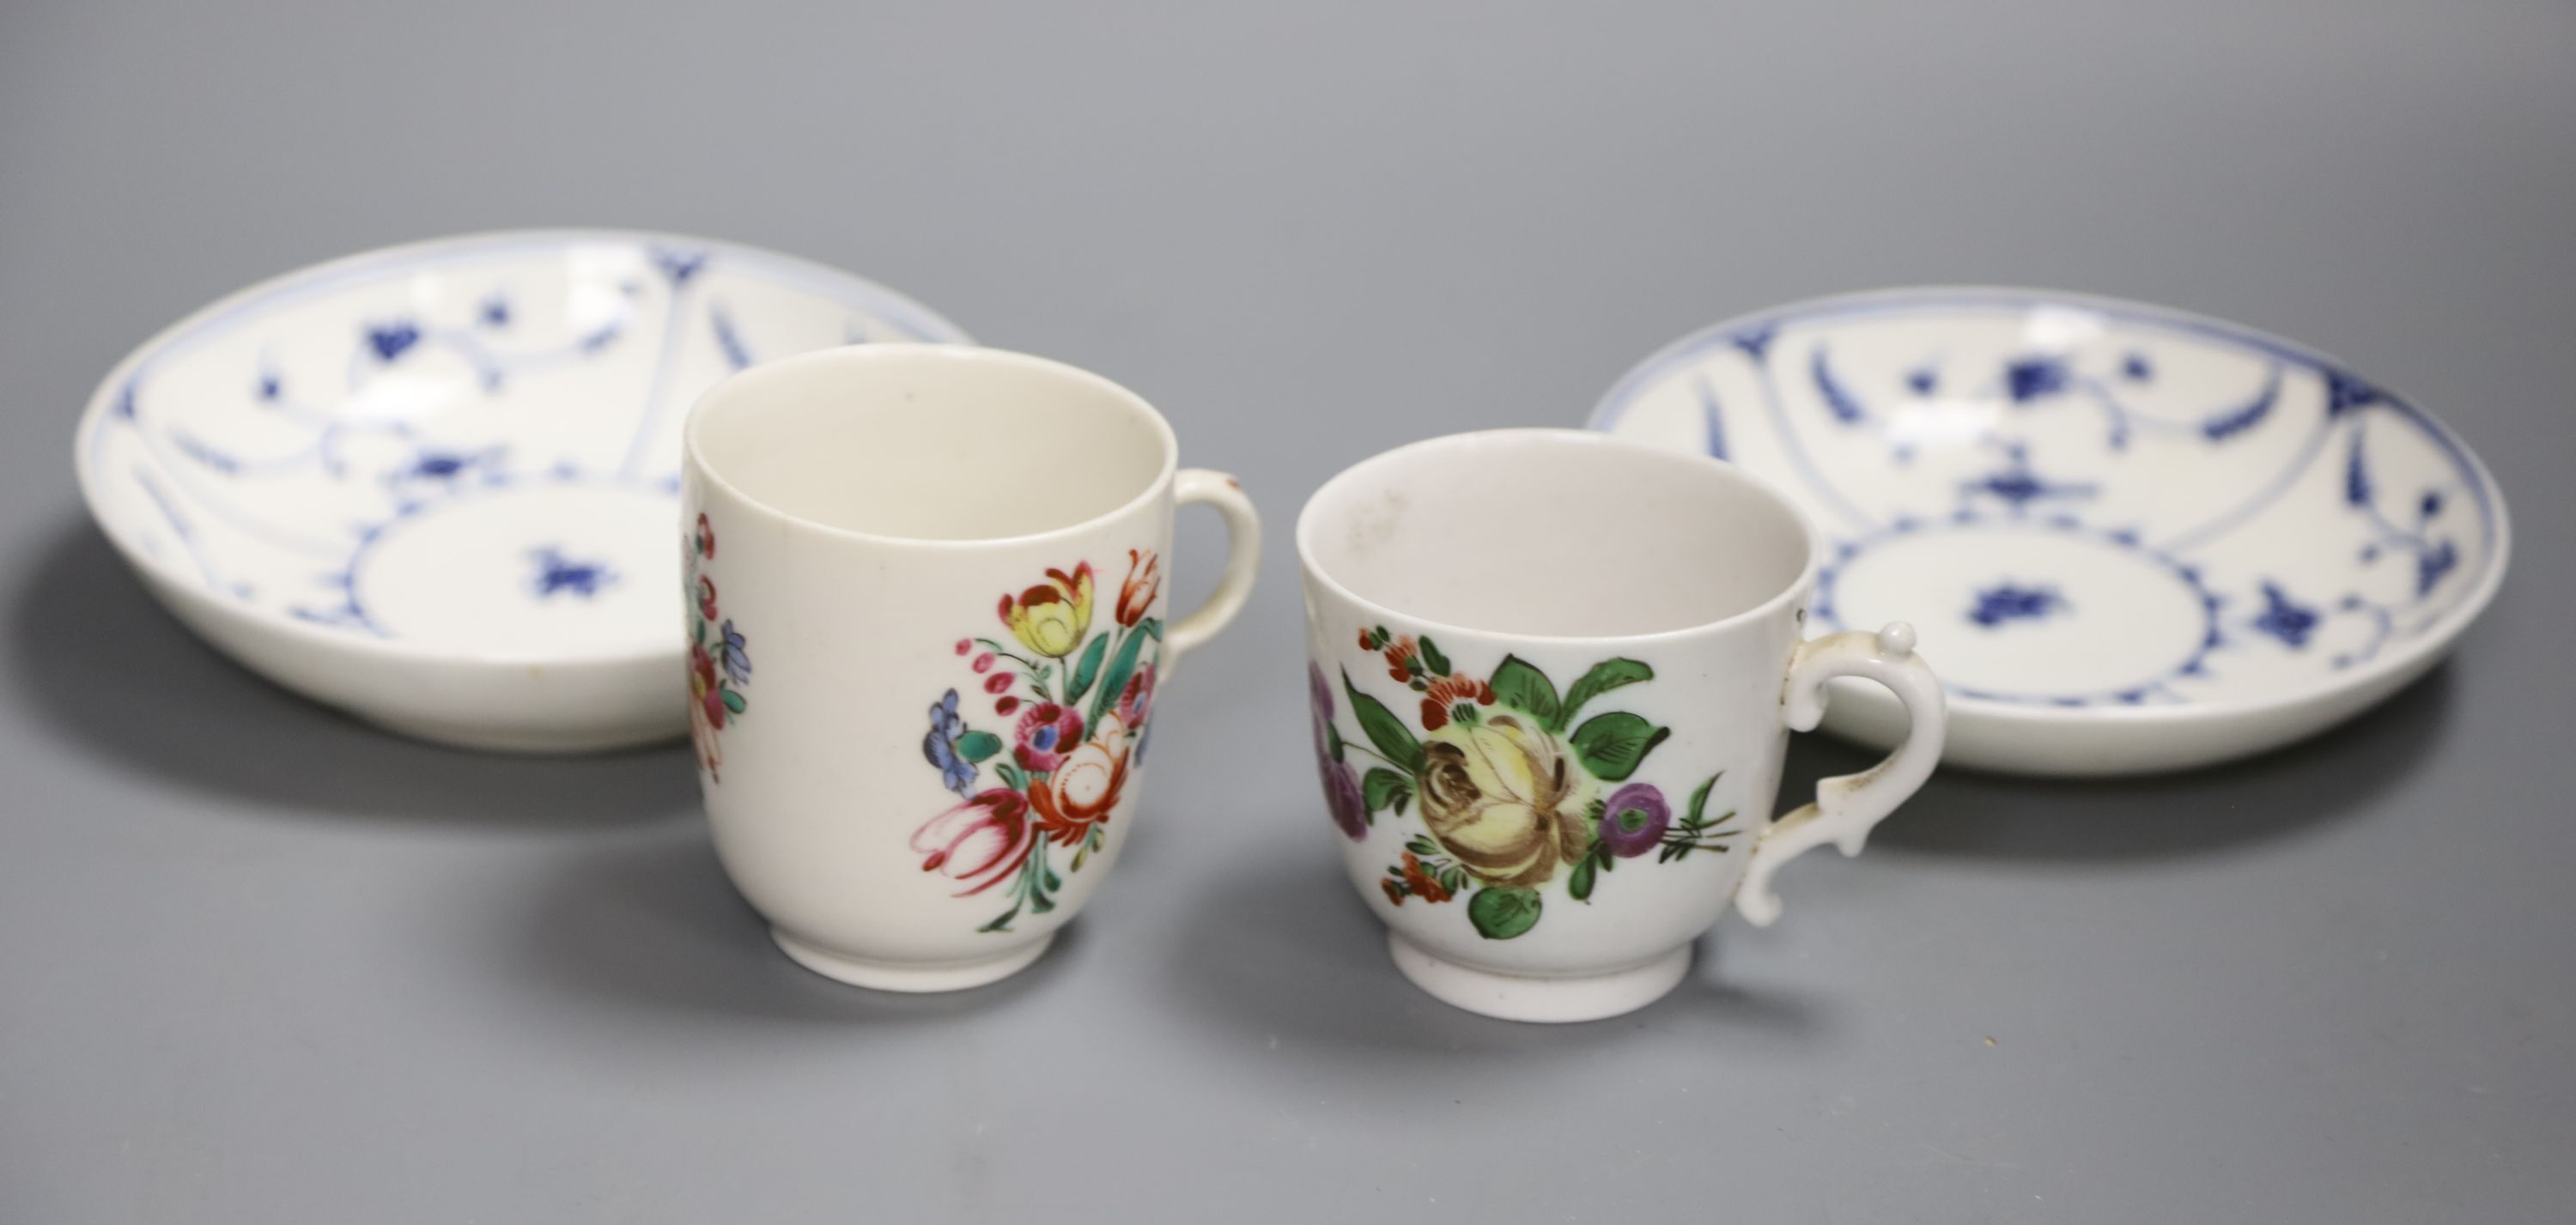 An 18th century Doccia cup with early scroll handle painted with flowers, another Doccia cup similarly decorated with a kick handle